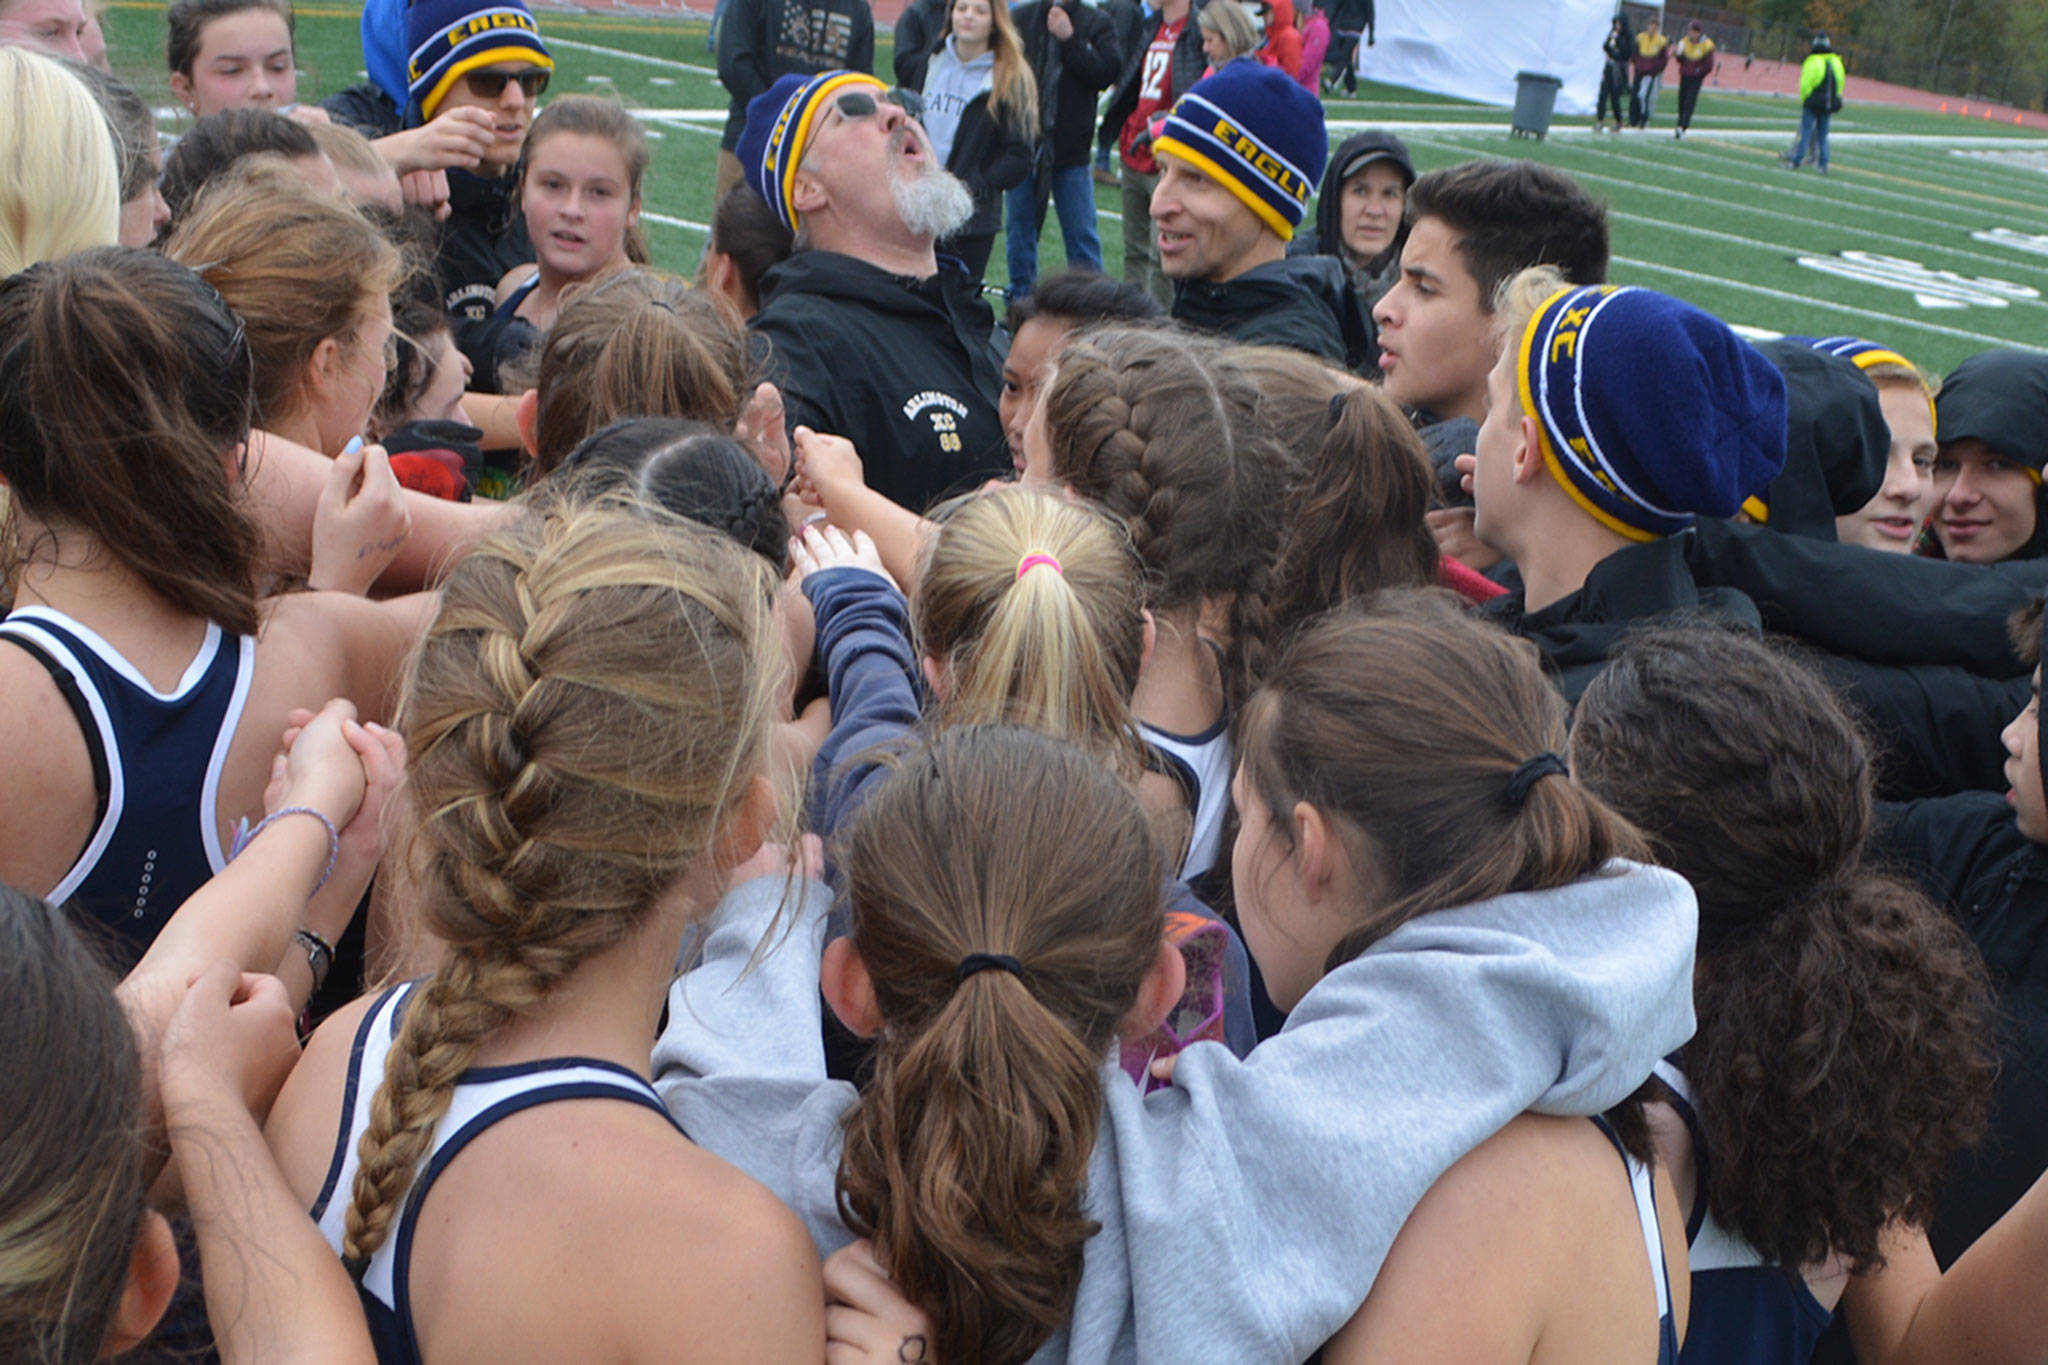 Everyone knows who Arlington cross country runners are now	(slide show)